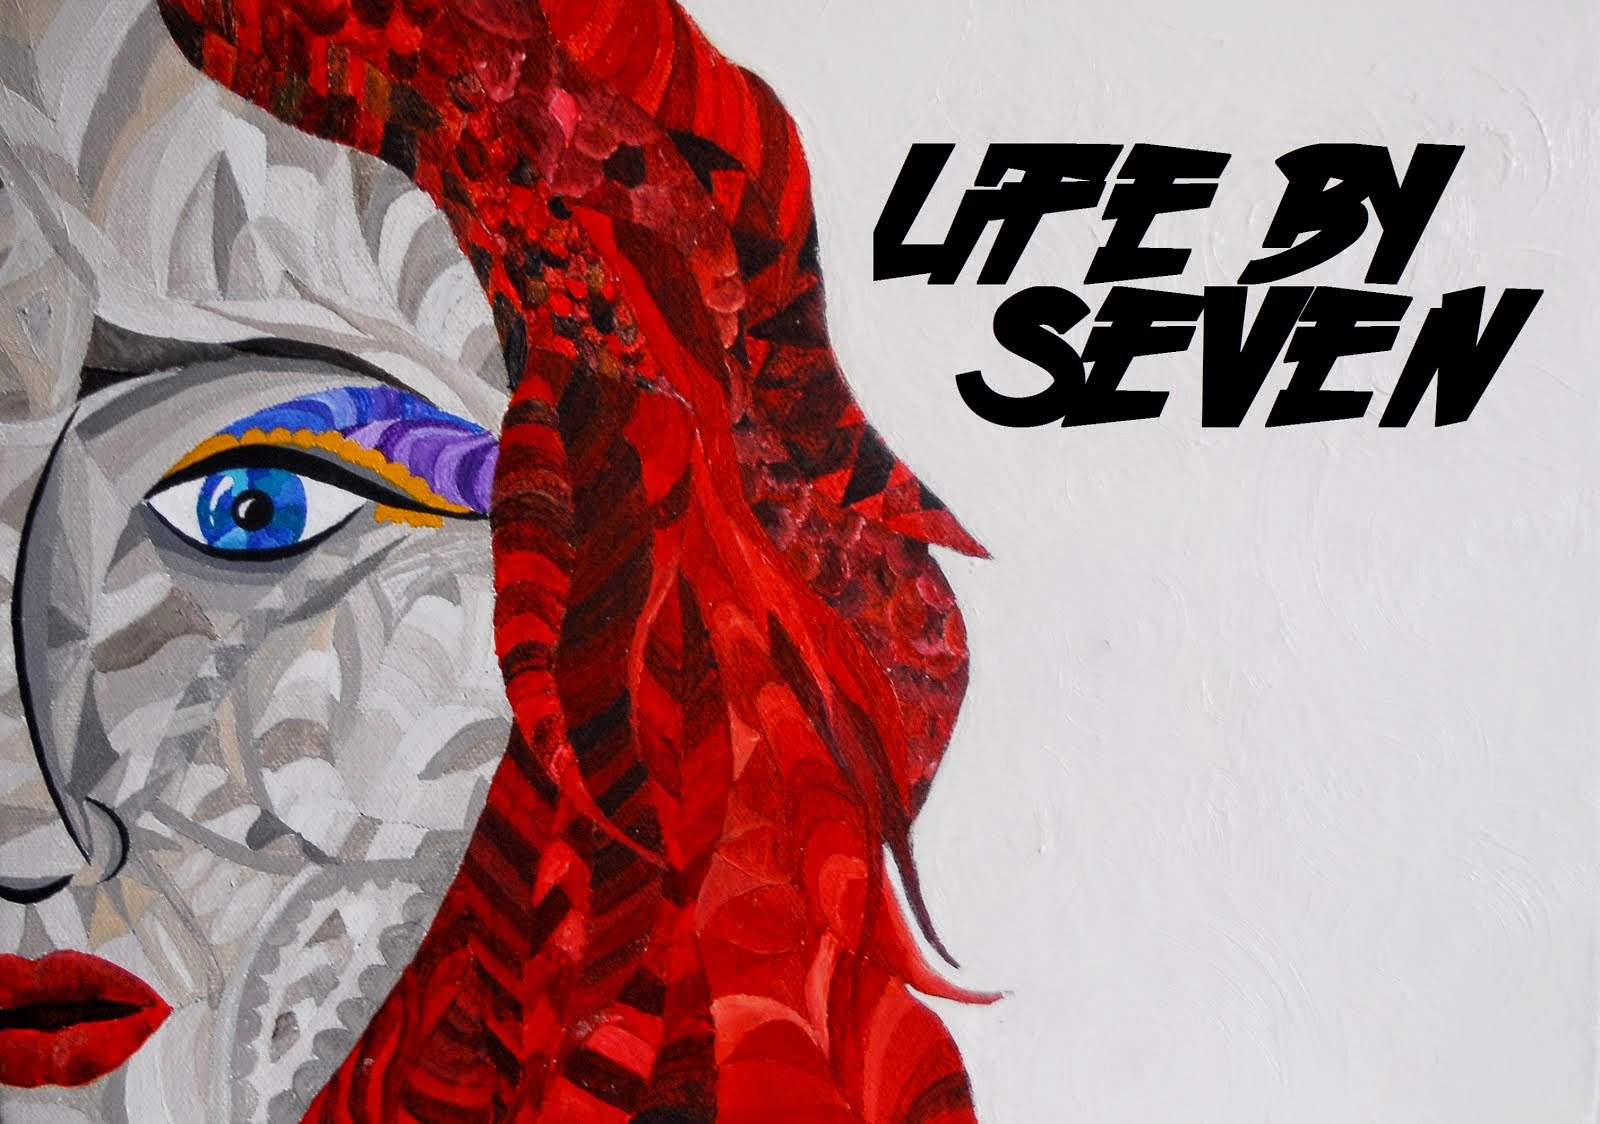 LIFE BY SEVEN